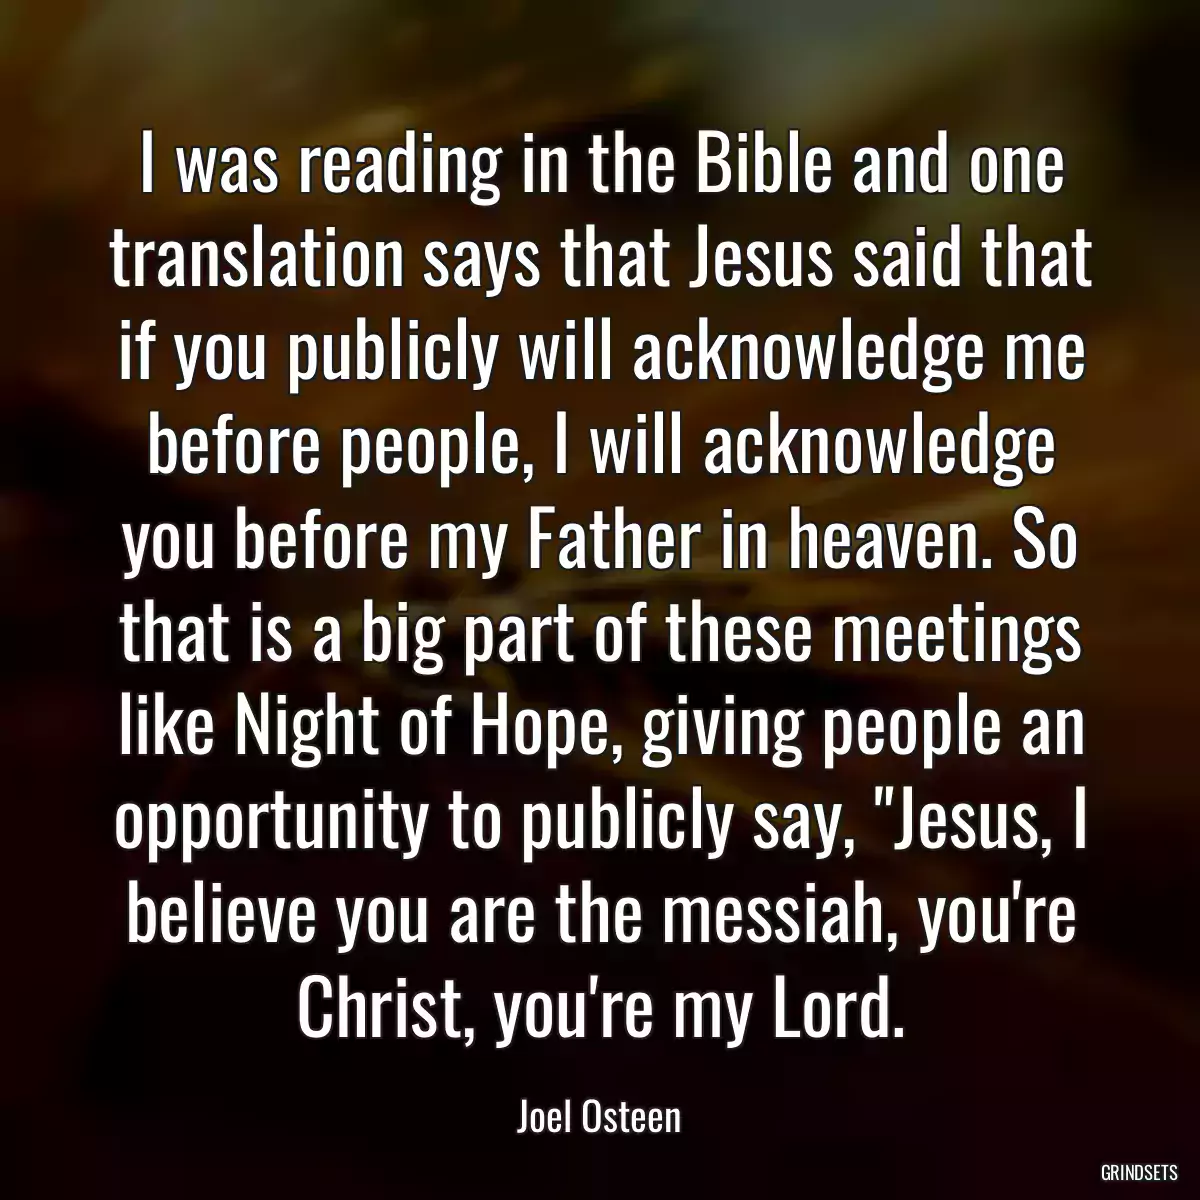 I was reading in the Bible and one translation says that Jesus said that if you publicly will acknowledge me before people, I will acknowledge you before my Father in heaven. So that is a big part of these meetings like Night of Hope, giving people an opportunity to publicly say, \